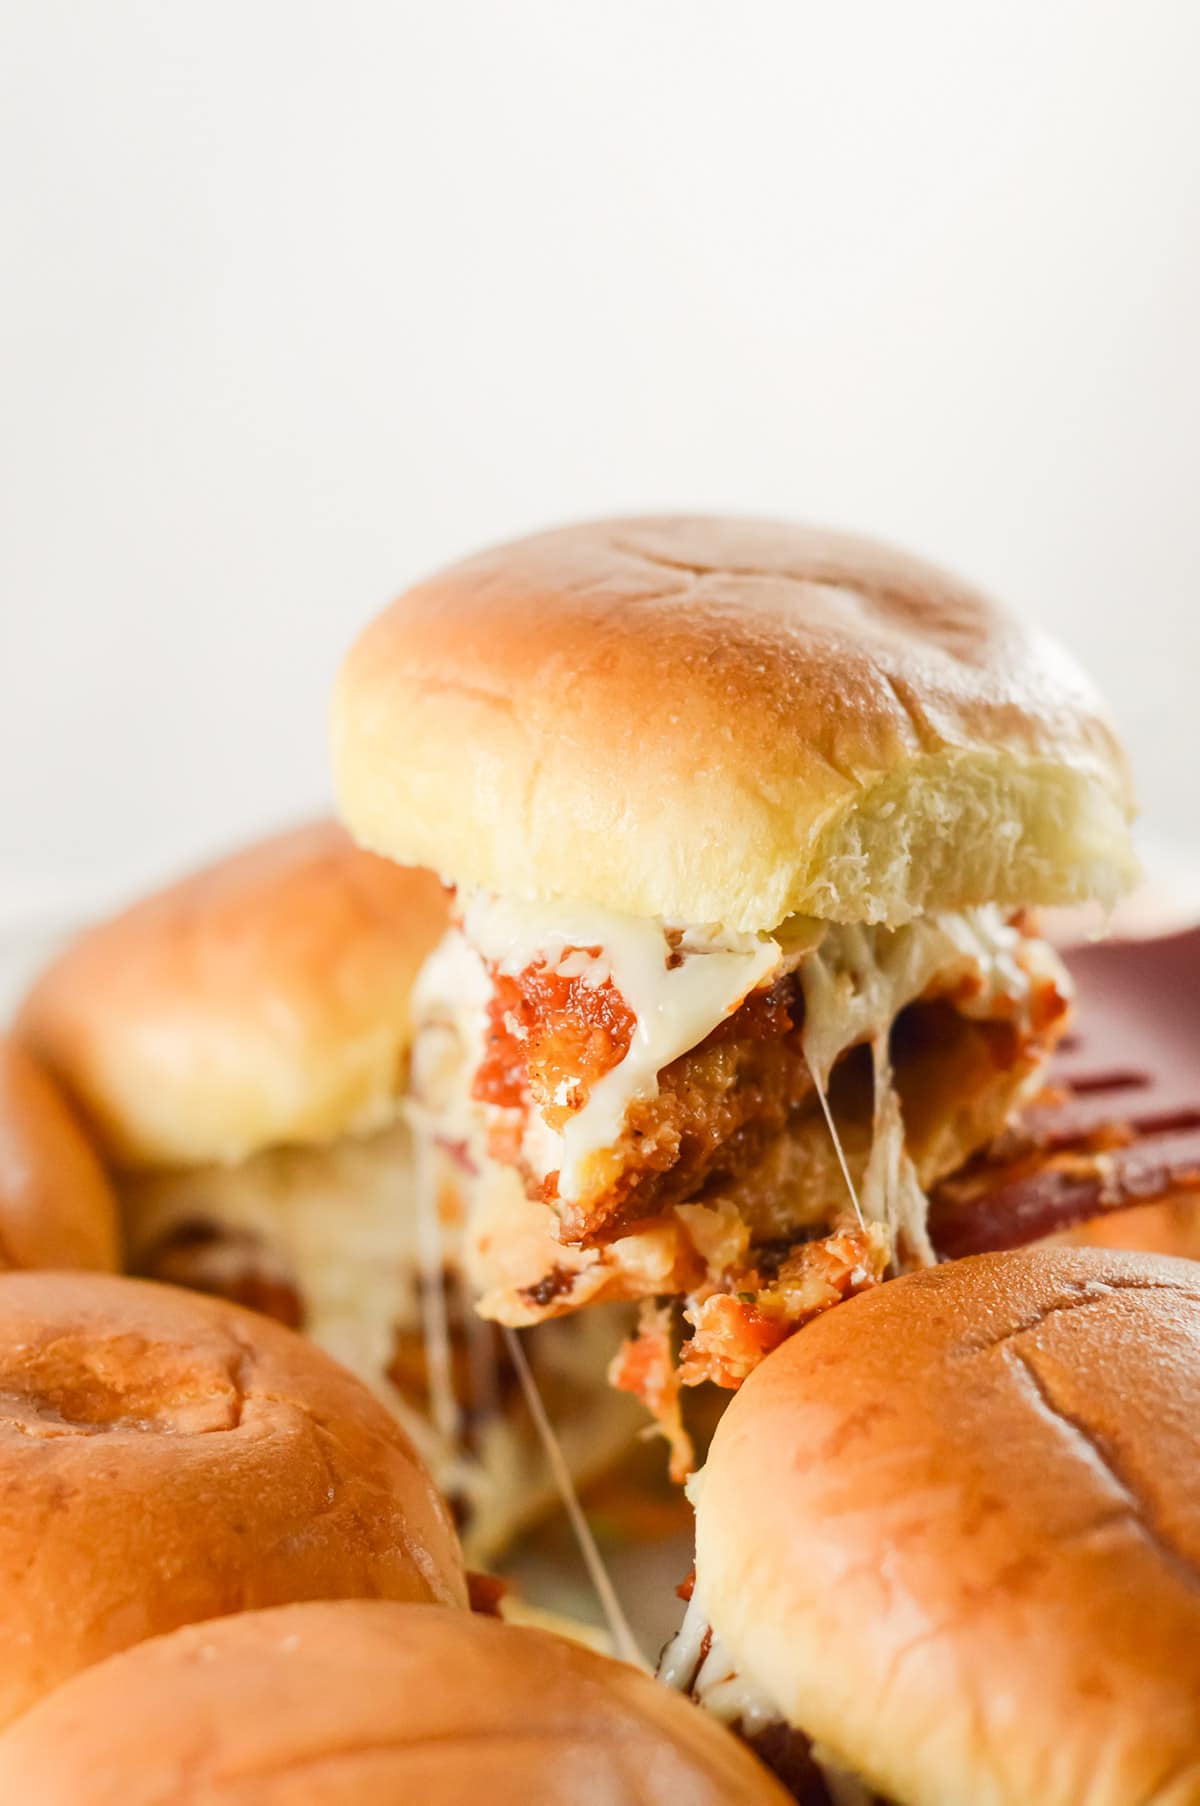 a spatula lifting a chicken parm slider from a the baking pan.